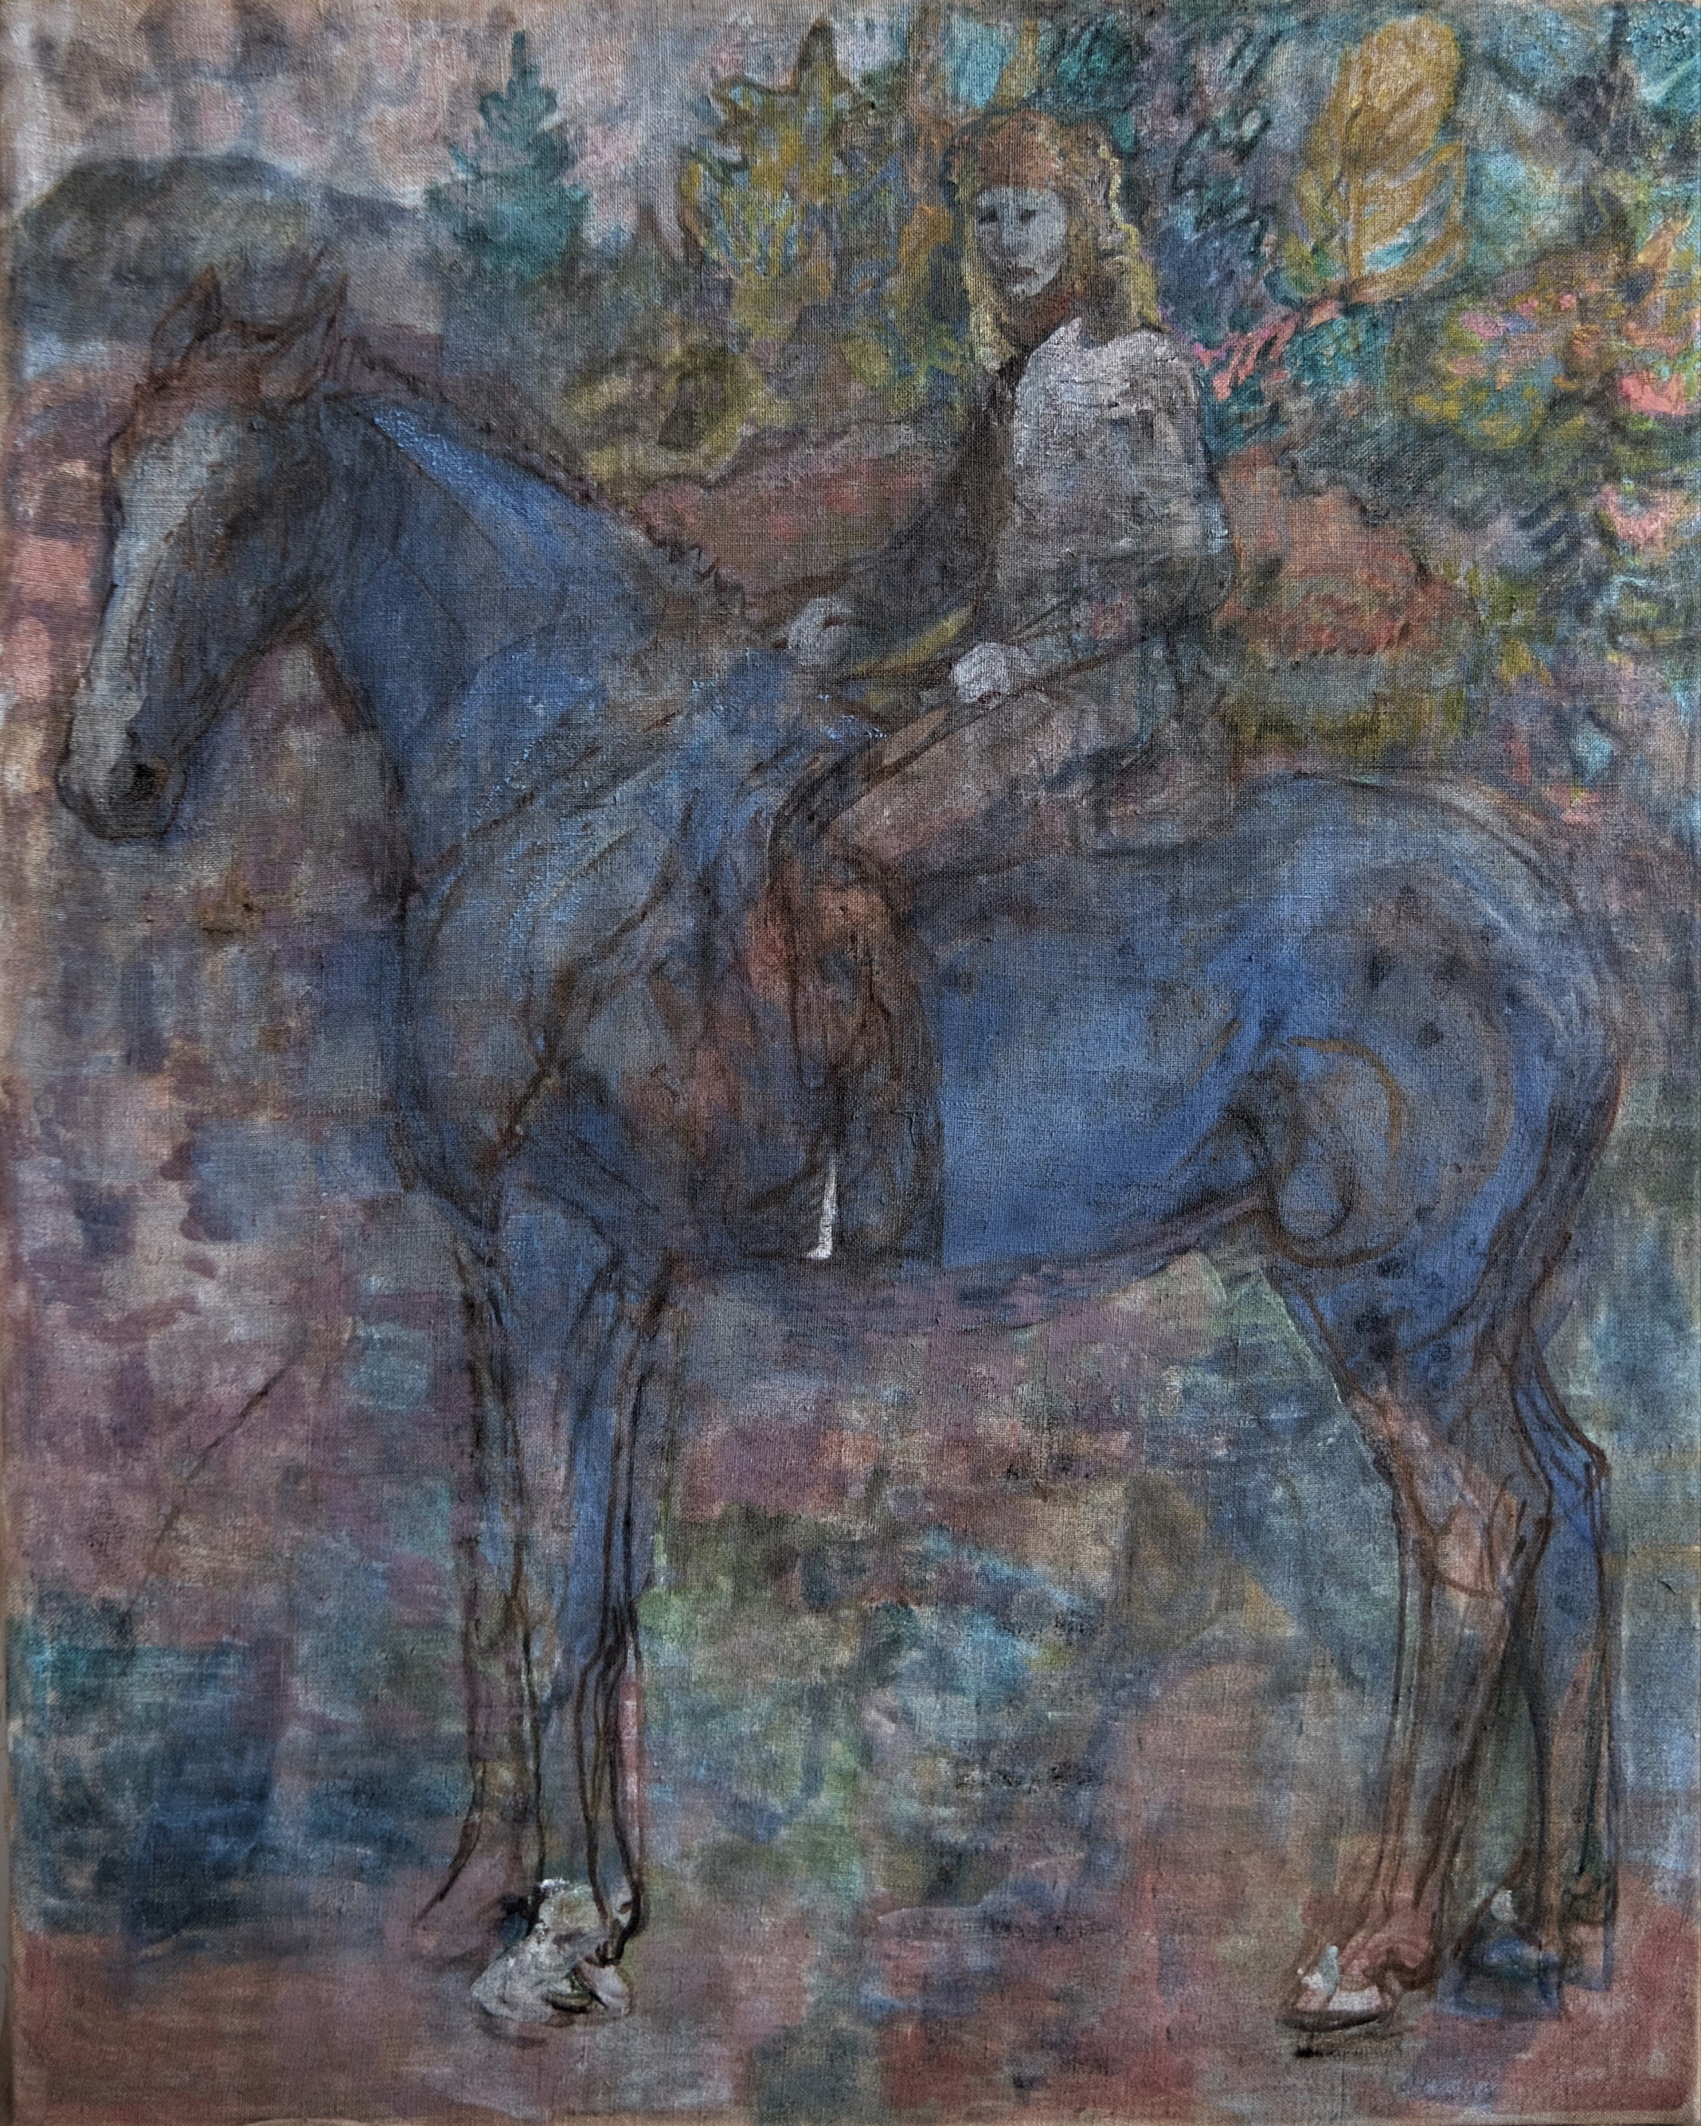 'The Portrait of a Horsewoman', eugenie vronskaya, Oil on Fabric, 155 x 125 cm